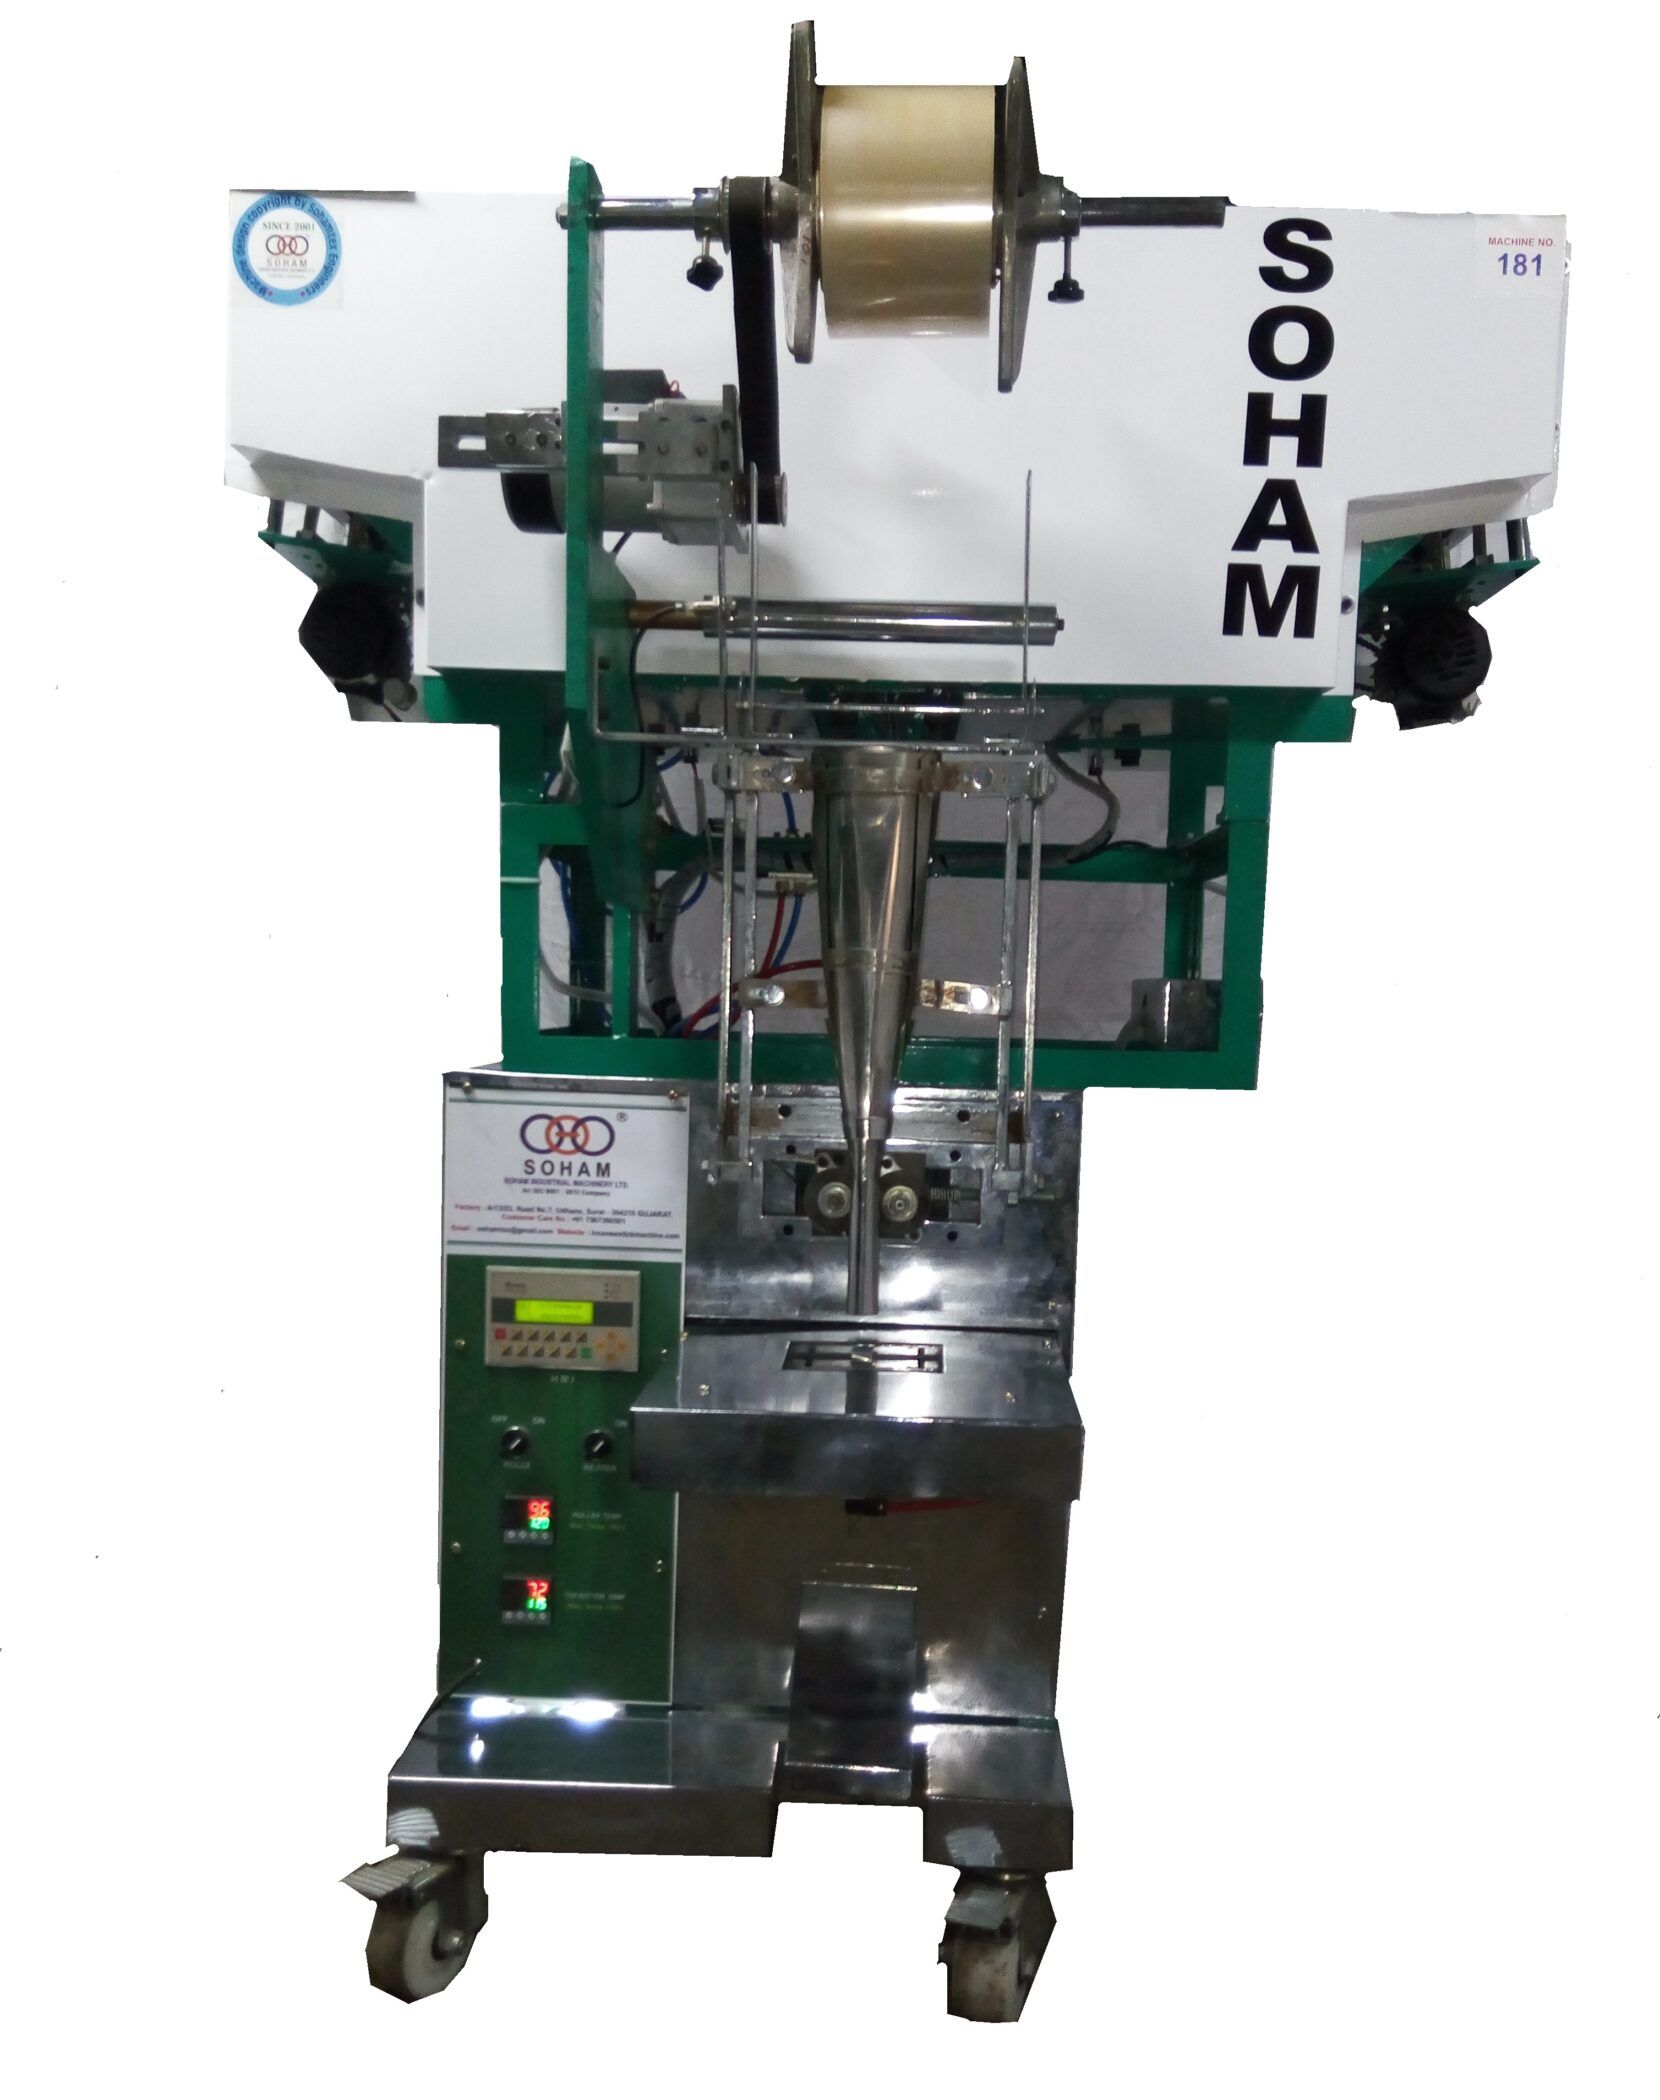 Primary Requirement for Florabatti counting & packing machine